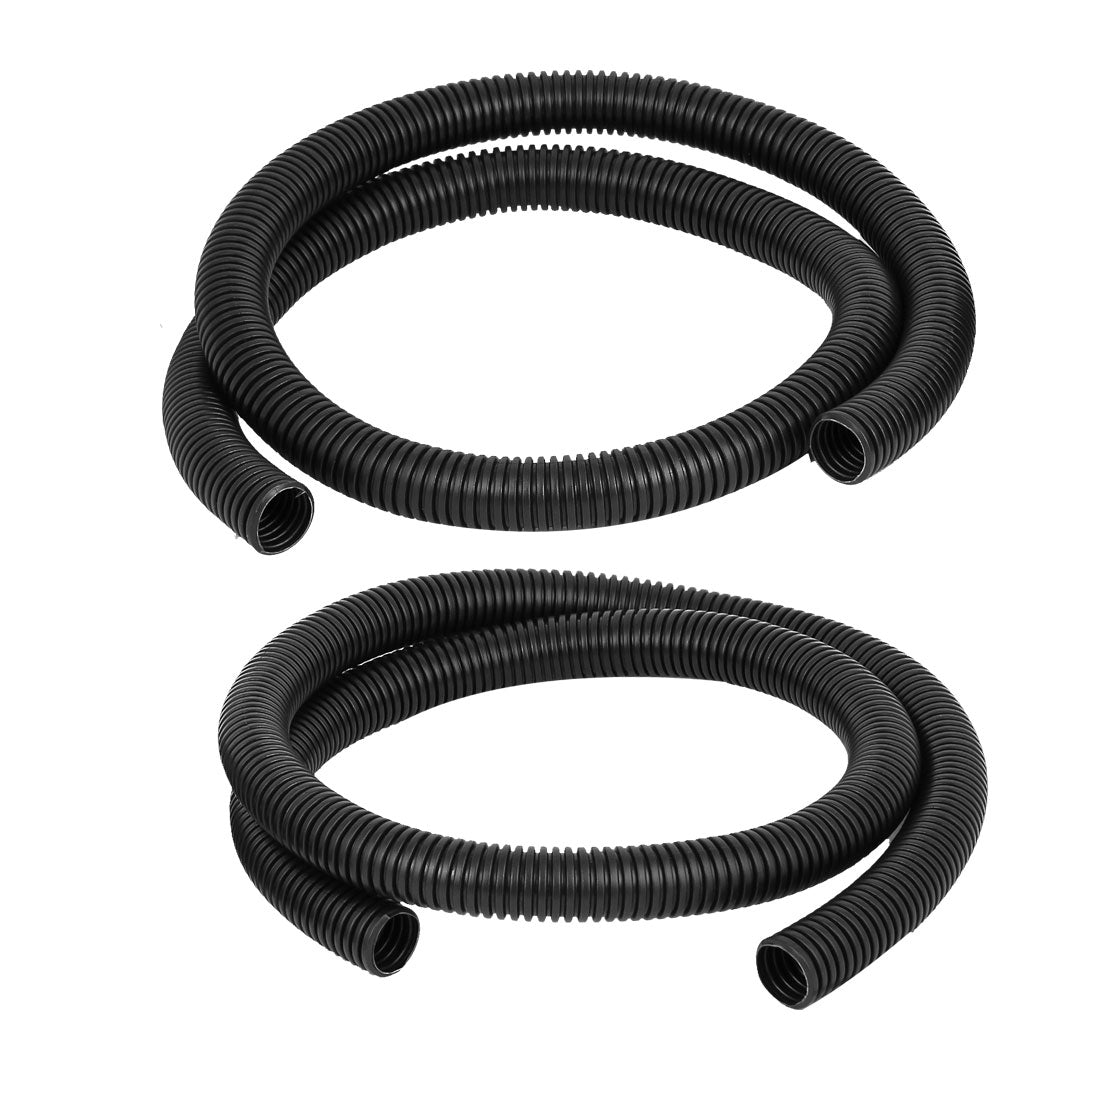 uxcell Uxcell 1.3 M 20 x 25 mm Plastic Corrugated Conduit Tube for Garden,Office Black 2pcs